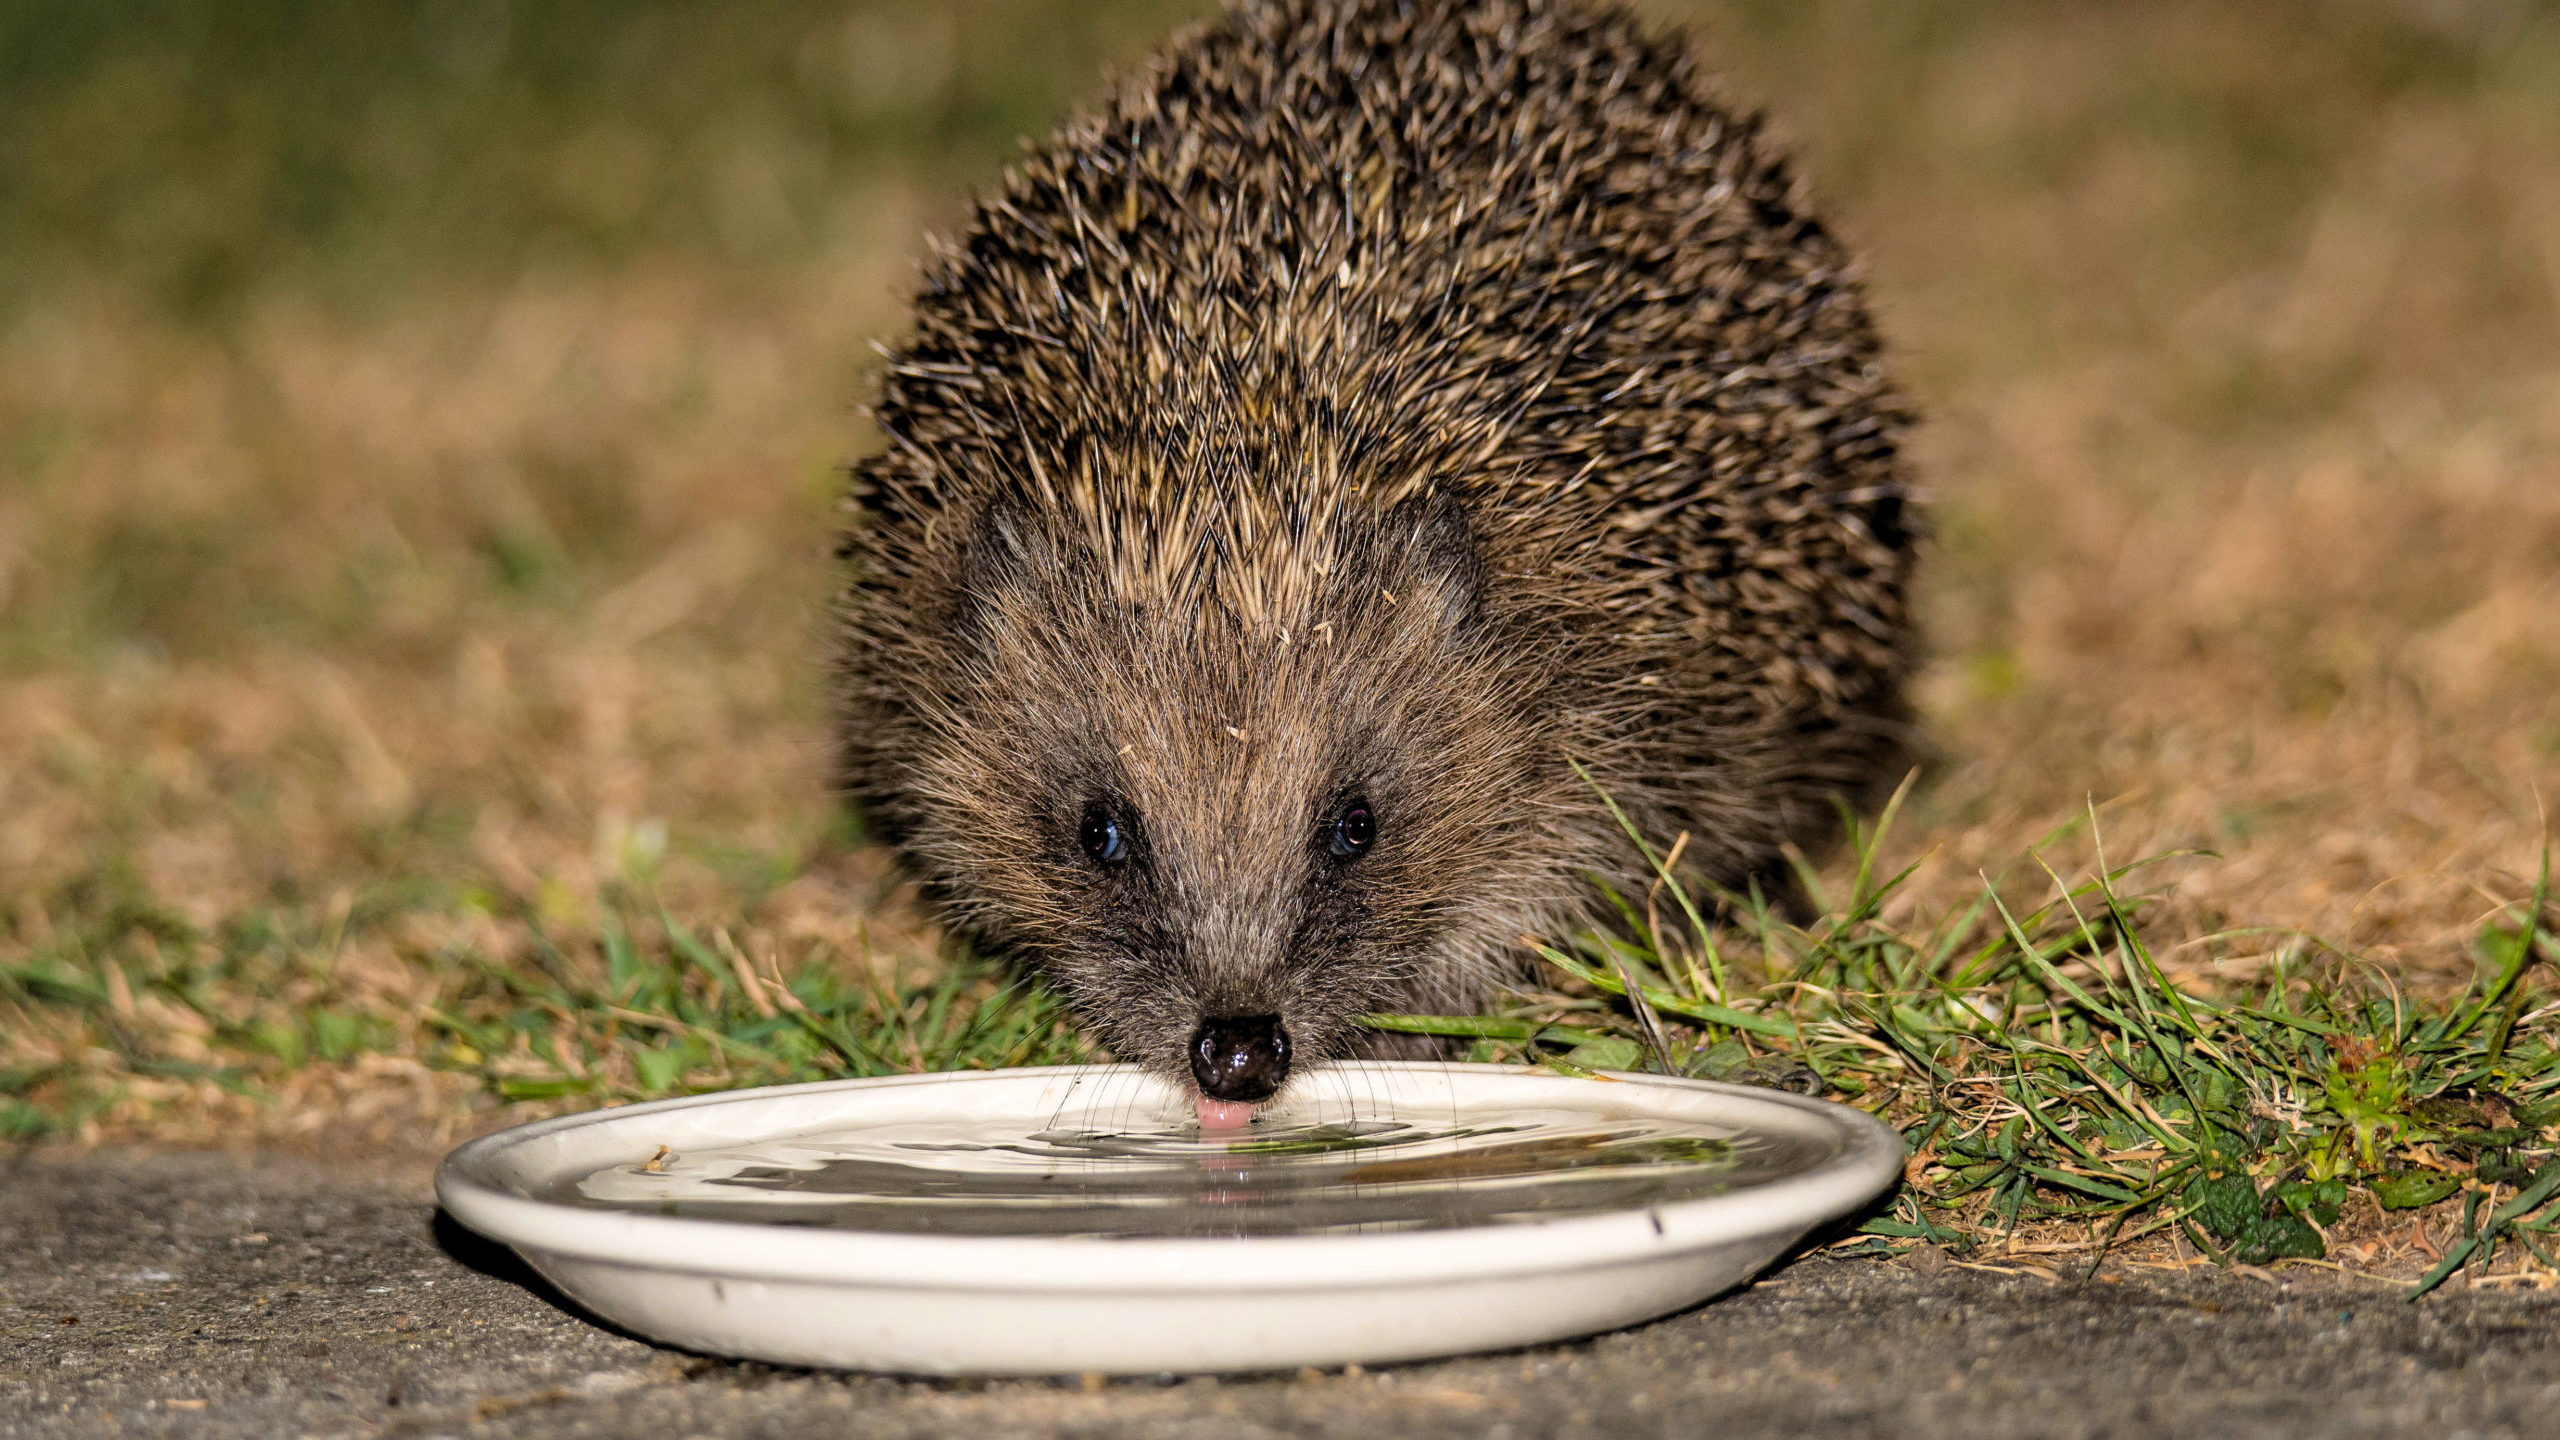 A hedgehog drinking from a shallow bowl.